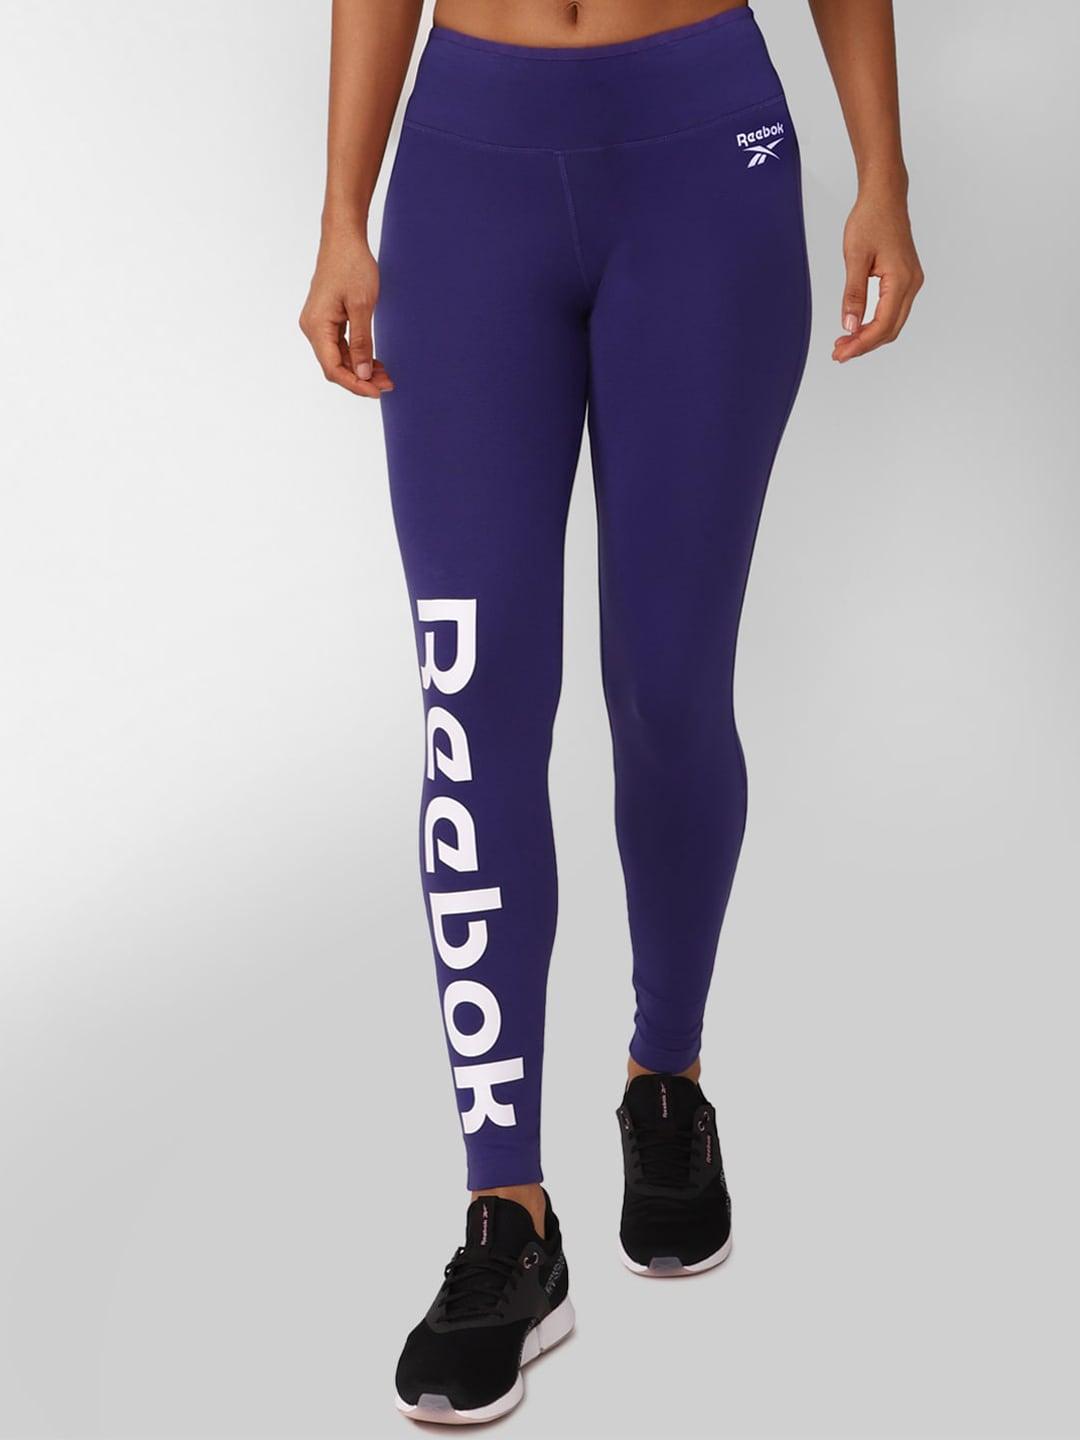 reebok-women-printed-high-gsm-ankle-length-tights